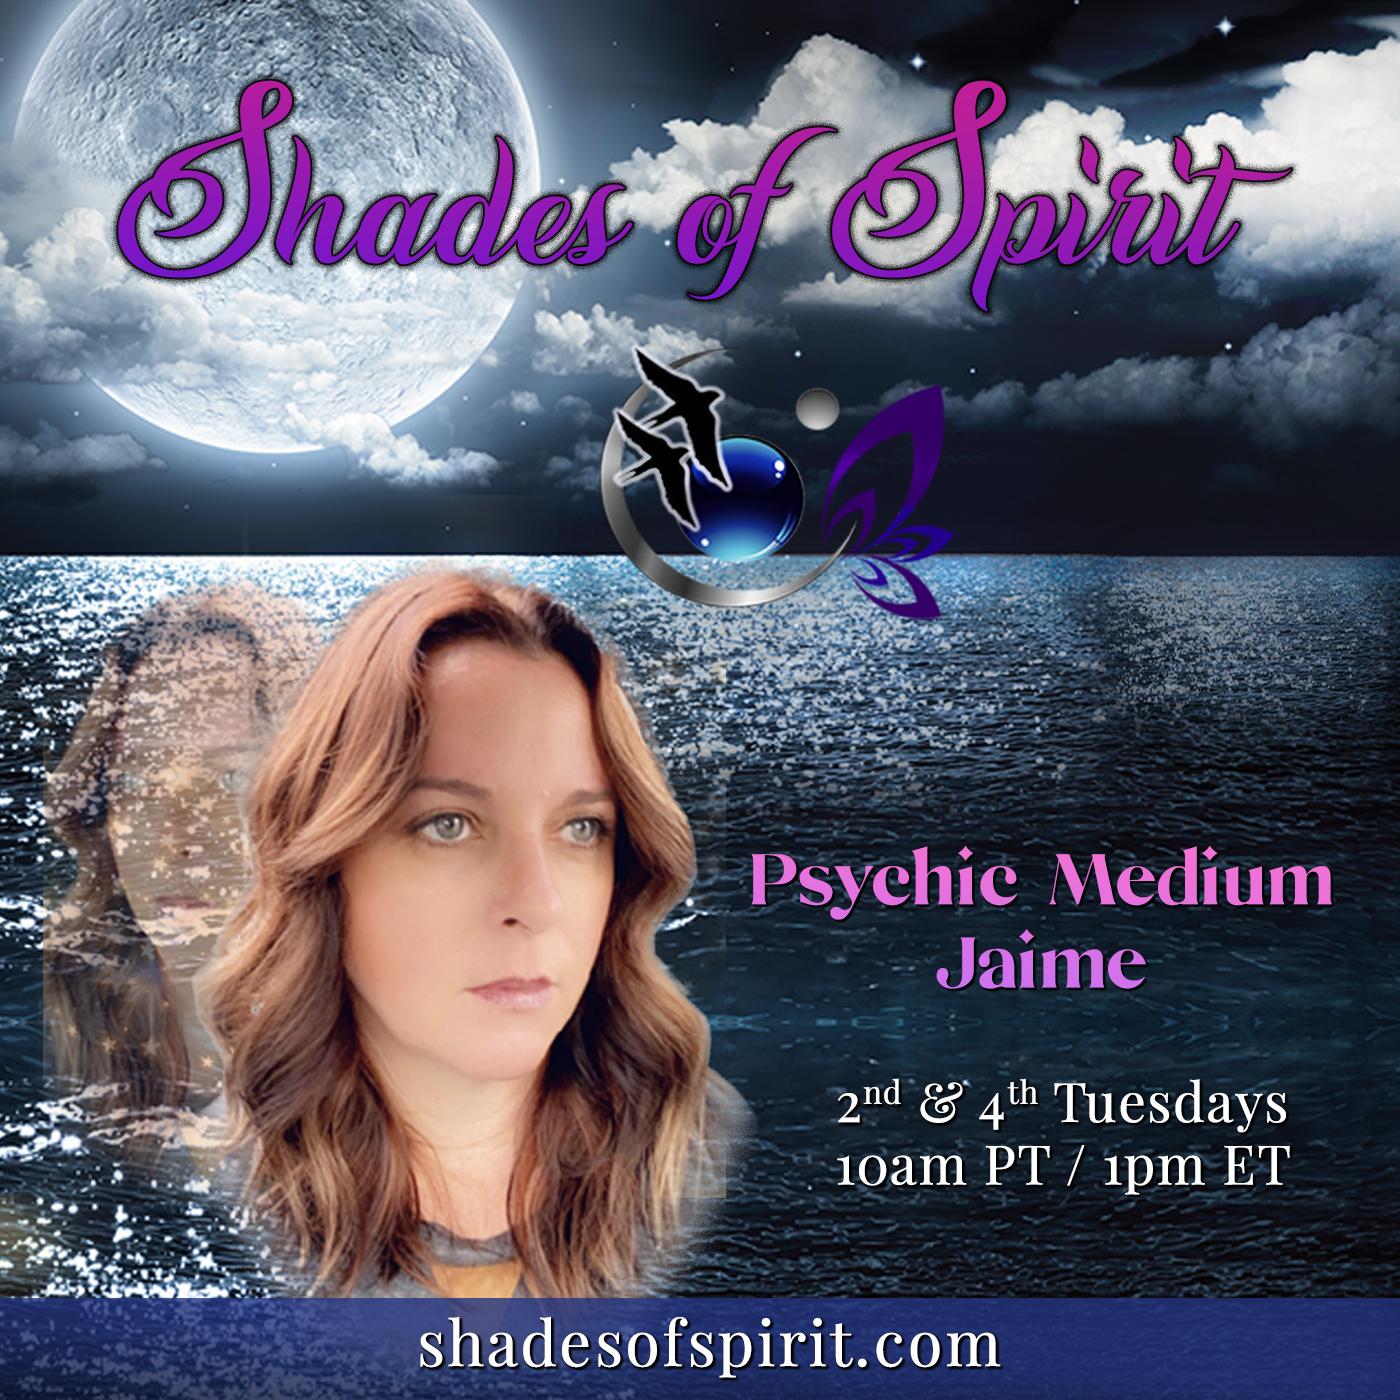 Shades of Spirit: Making Sacred Connections Bringing A Shade Of Spirit To You with Psychic Medium Jaime and "Spiritwalker" Nicole